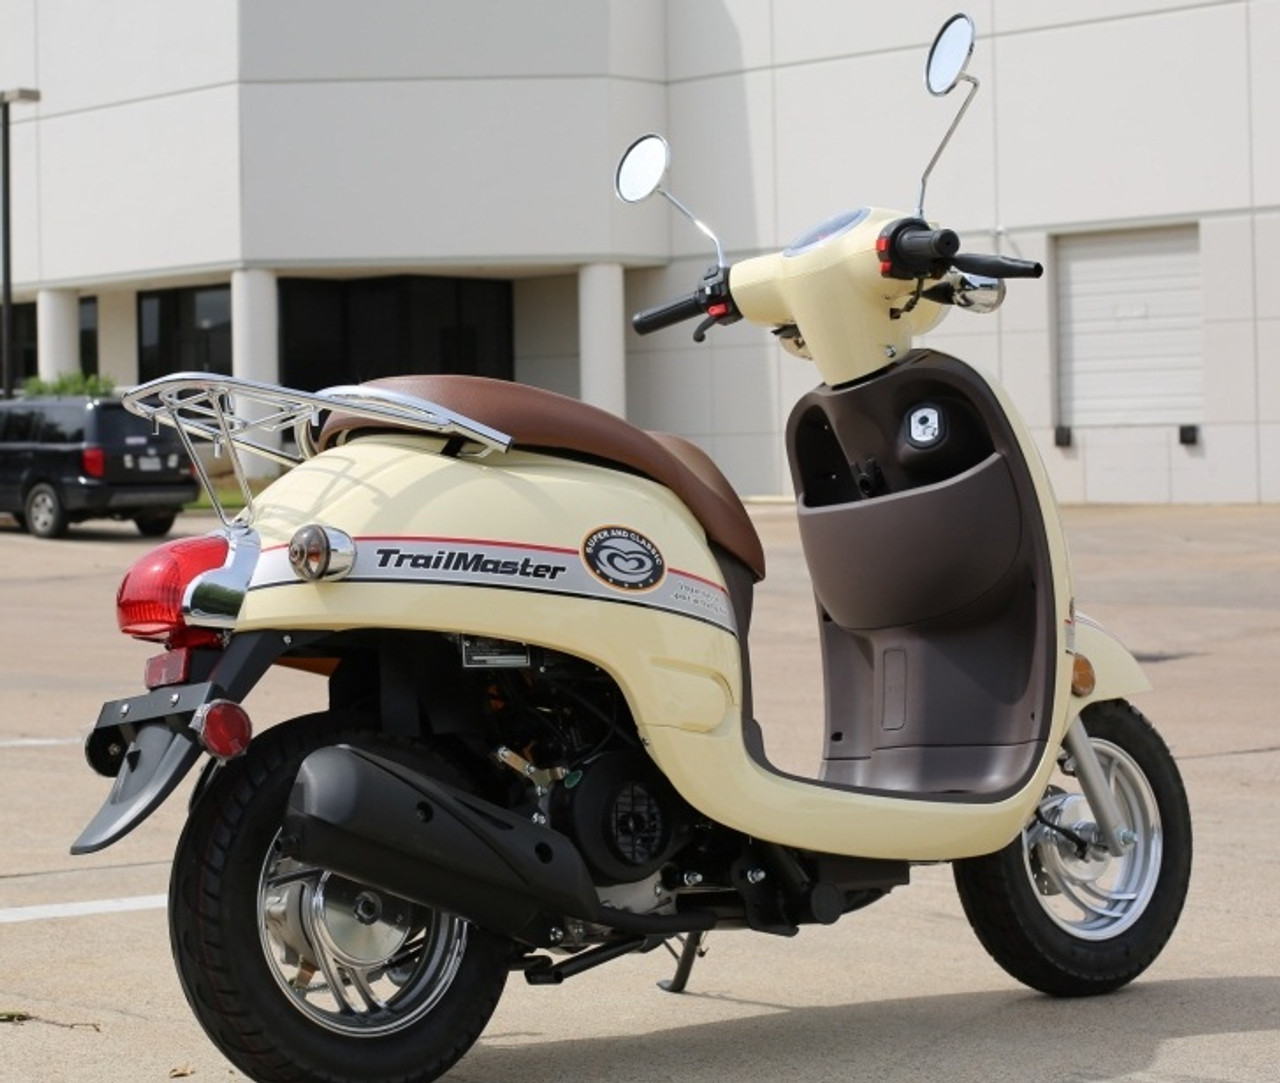 Trail Master Milano 50A Stylish Design Scooter Street Legal with Electric and Kick Start